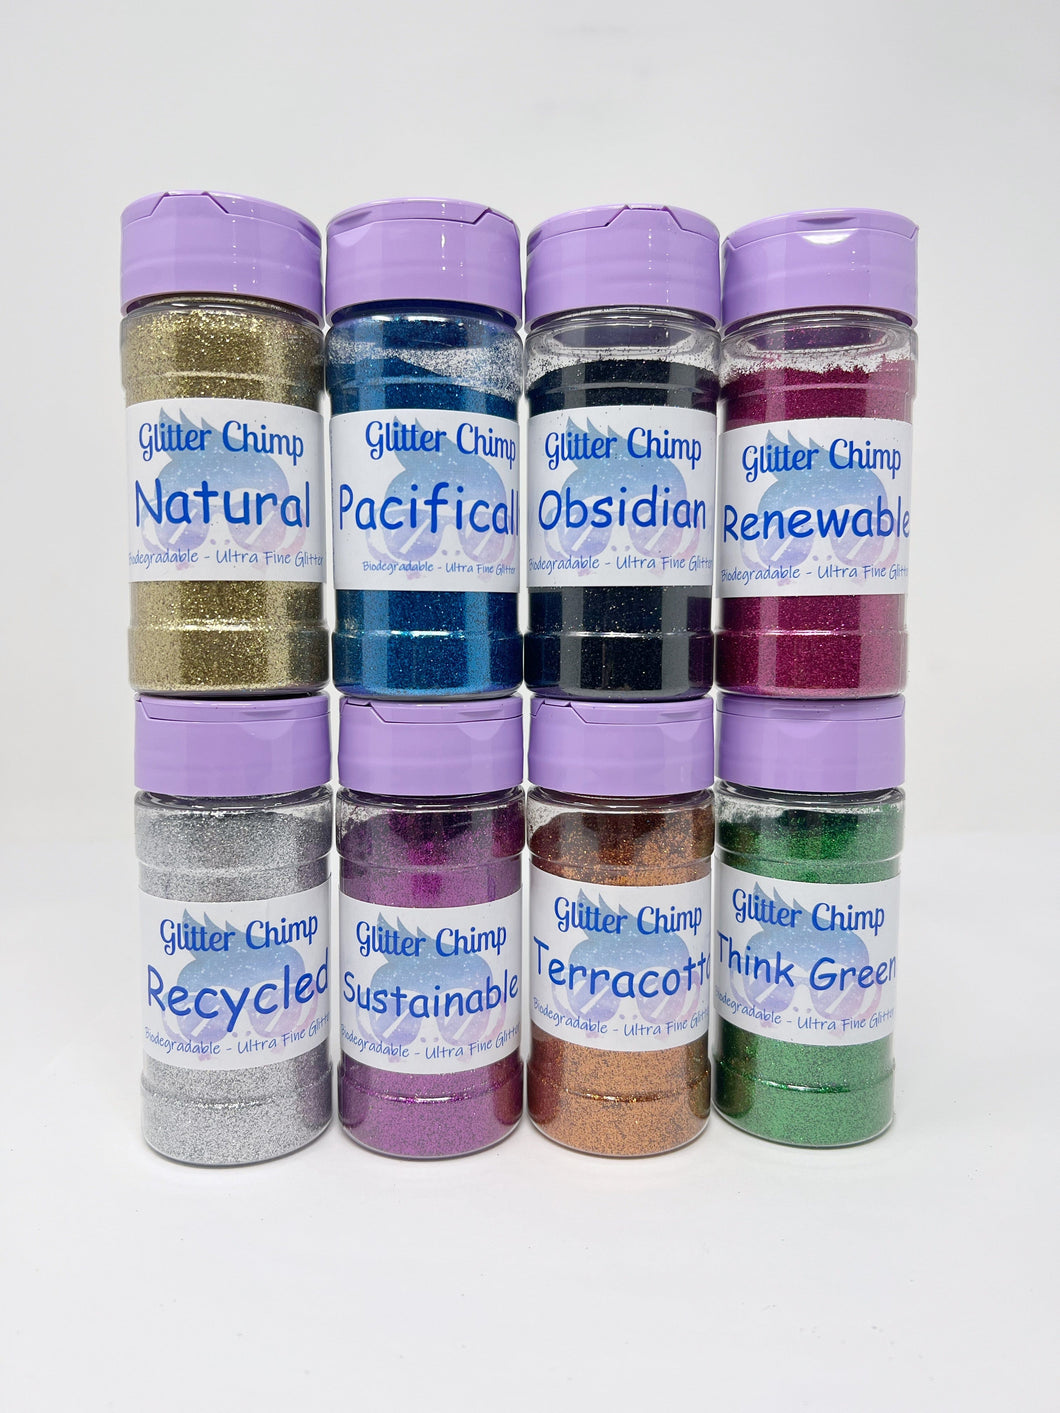 Biodegradable Glitter - Specialty Glitter Pack (For lotions, bath bombs, sugar scrubs, and more)